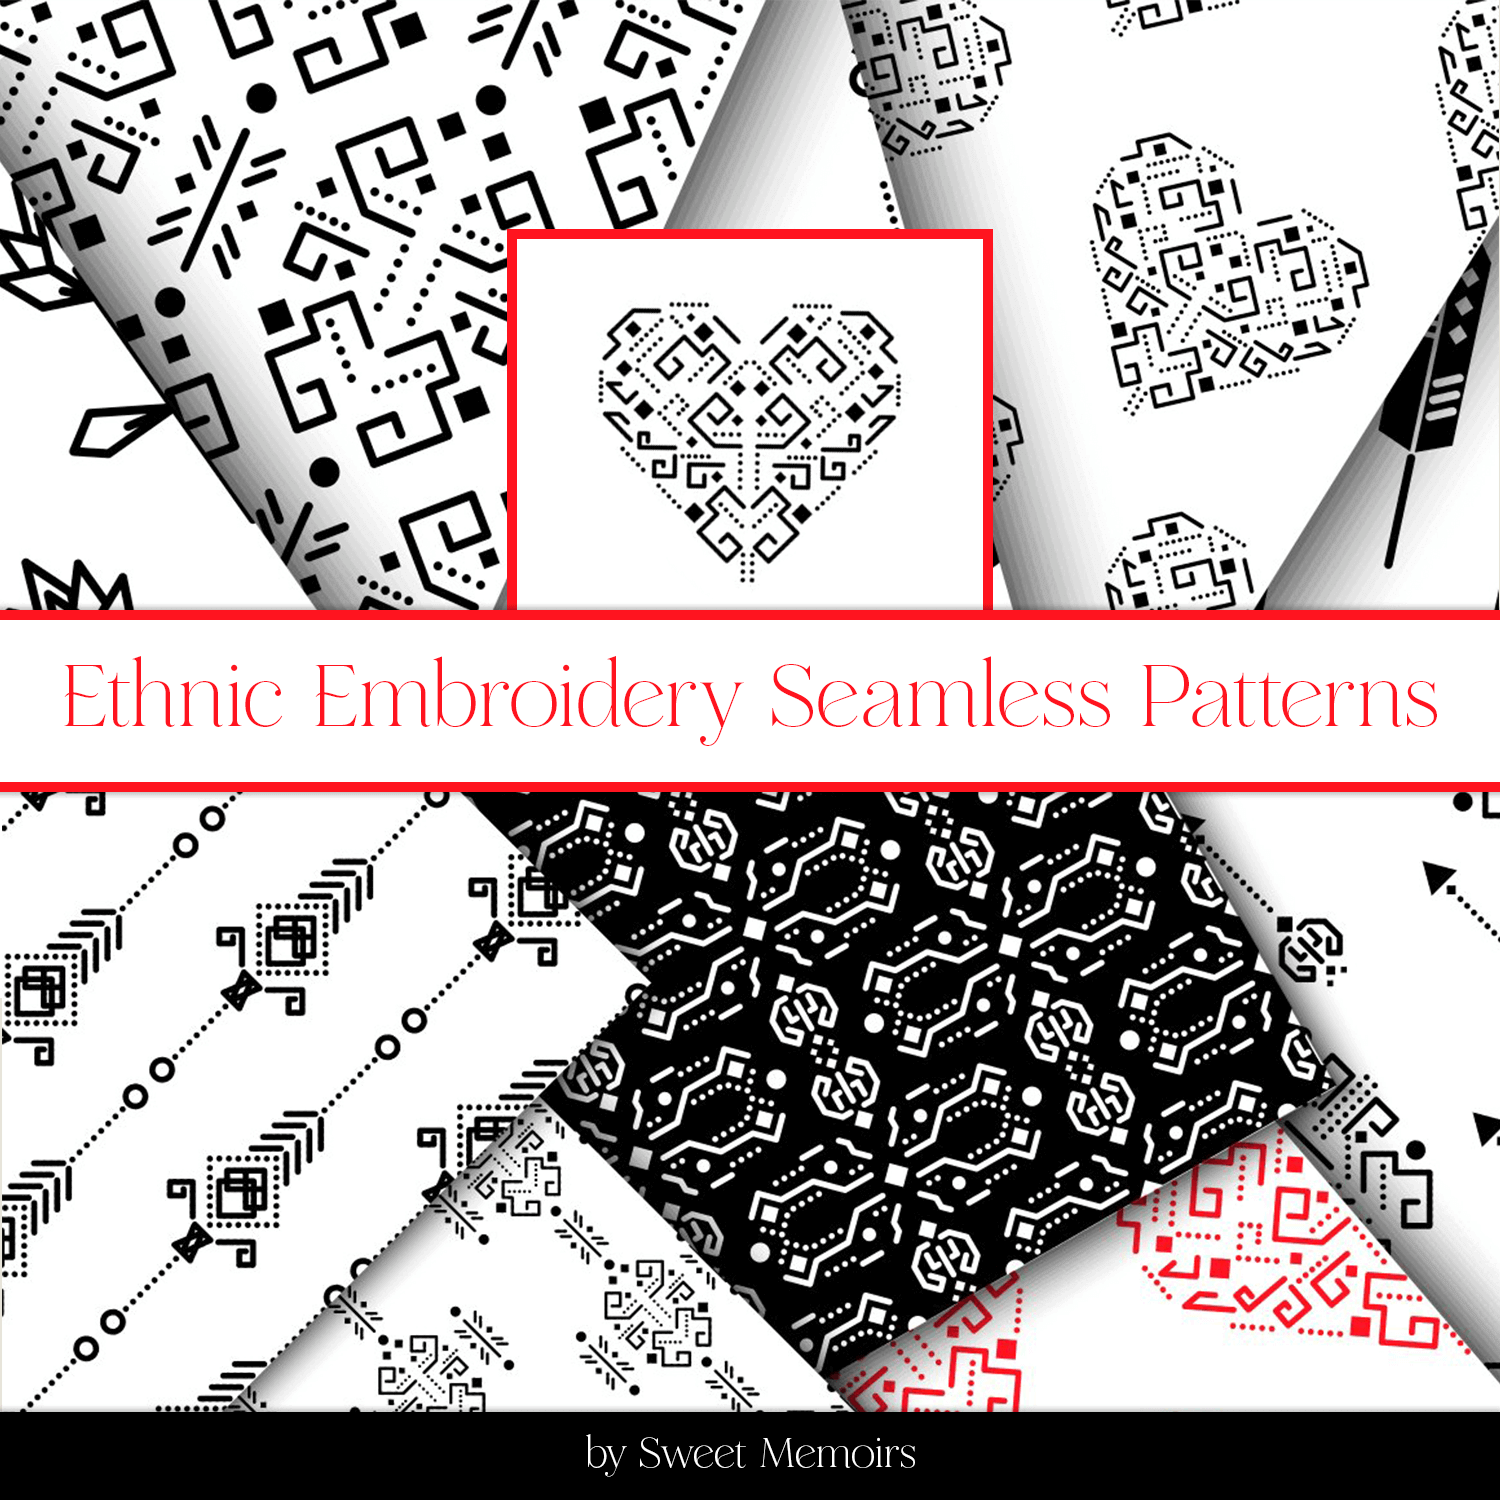 Ethnic Embroidery Seamless Patterns.